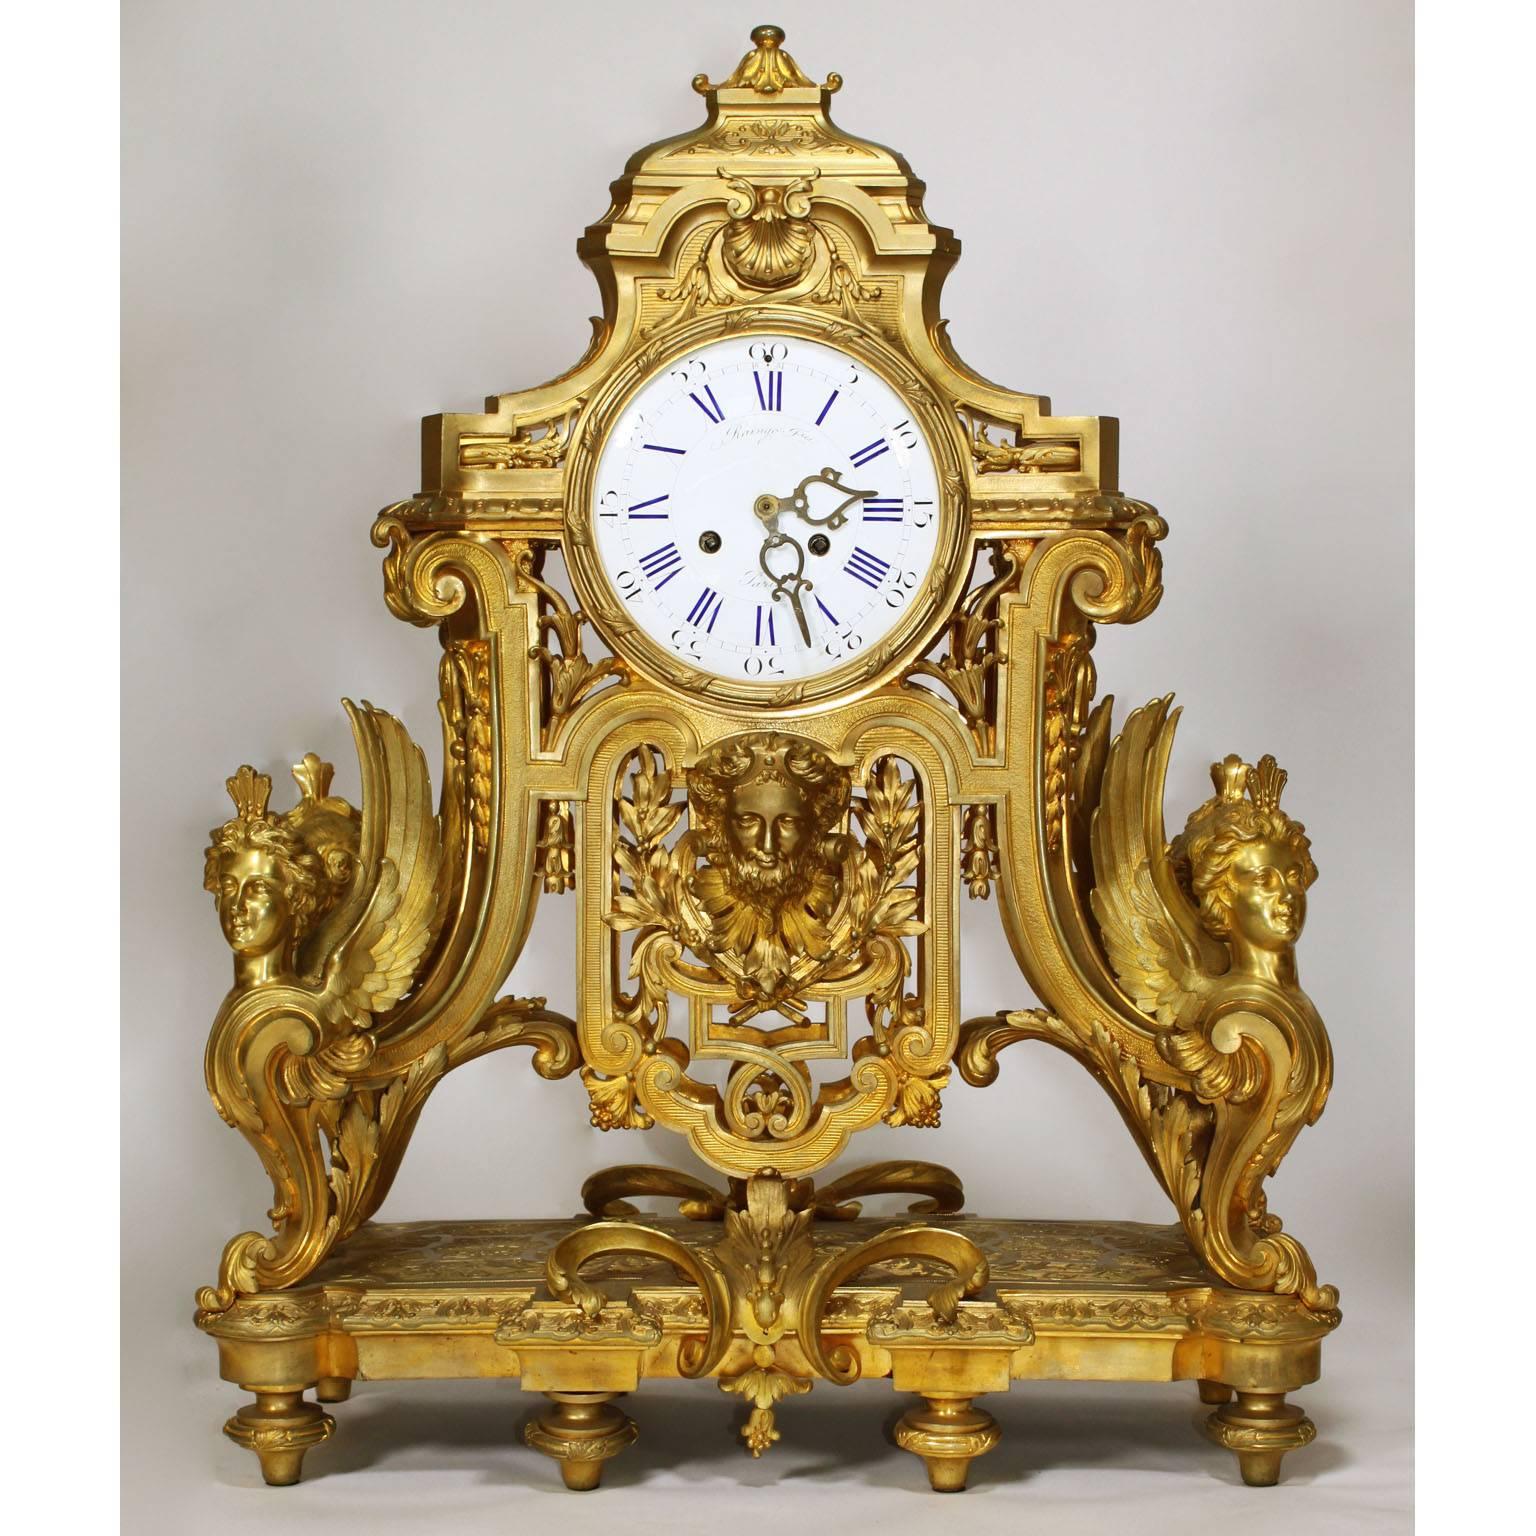 A very fine and palatial French 19th century Louis XIV style figural ormolu three-piece clock and candelabra garniture suite, comprising of a gilt-bronze clock and a pair of ten-light candelabra. The finely chased gilt-bronze clock with a domed top,